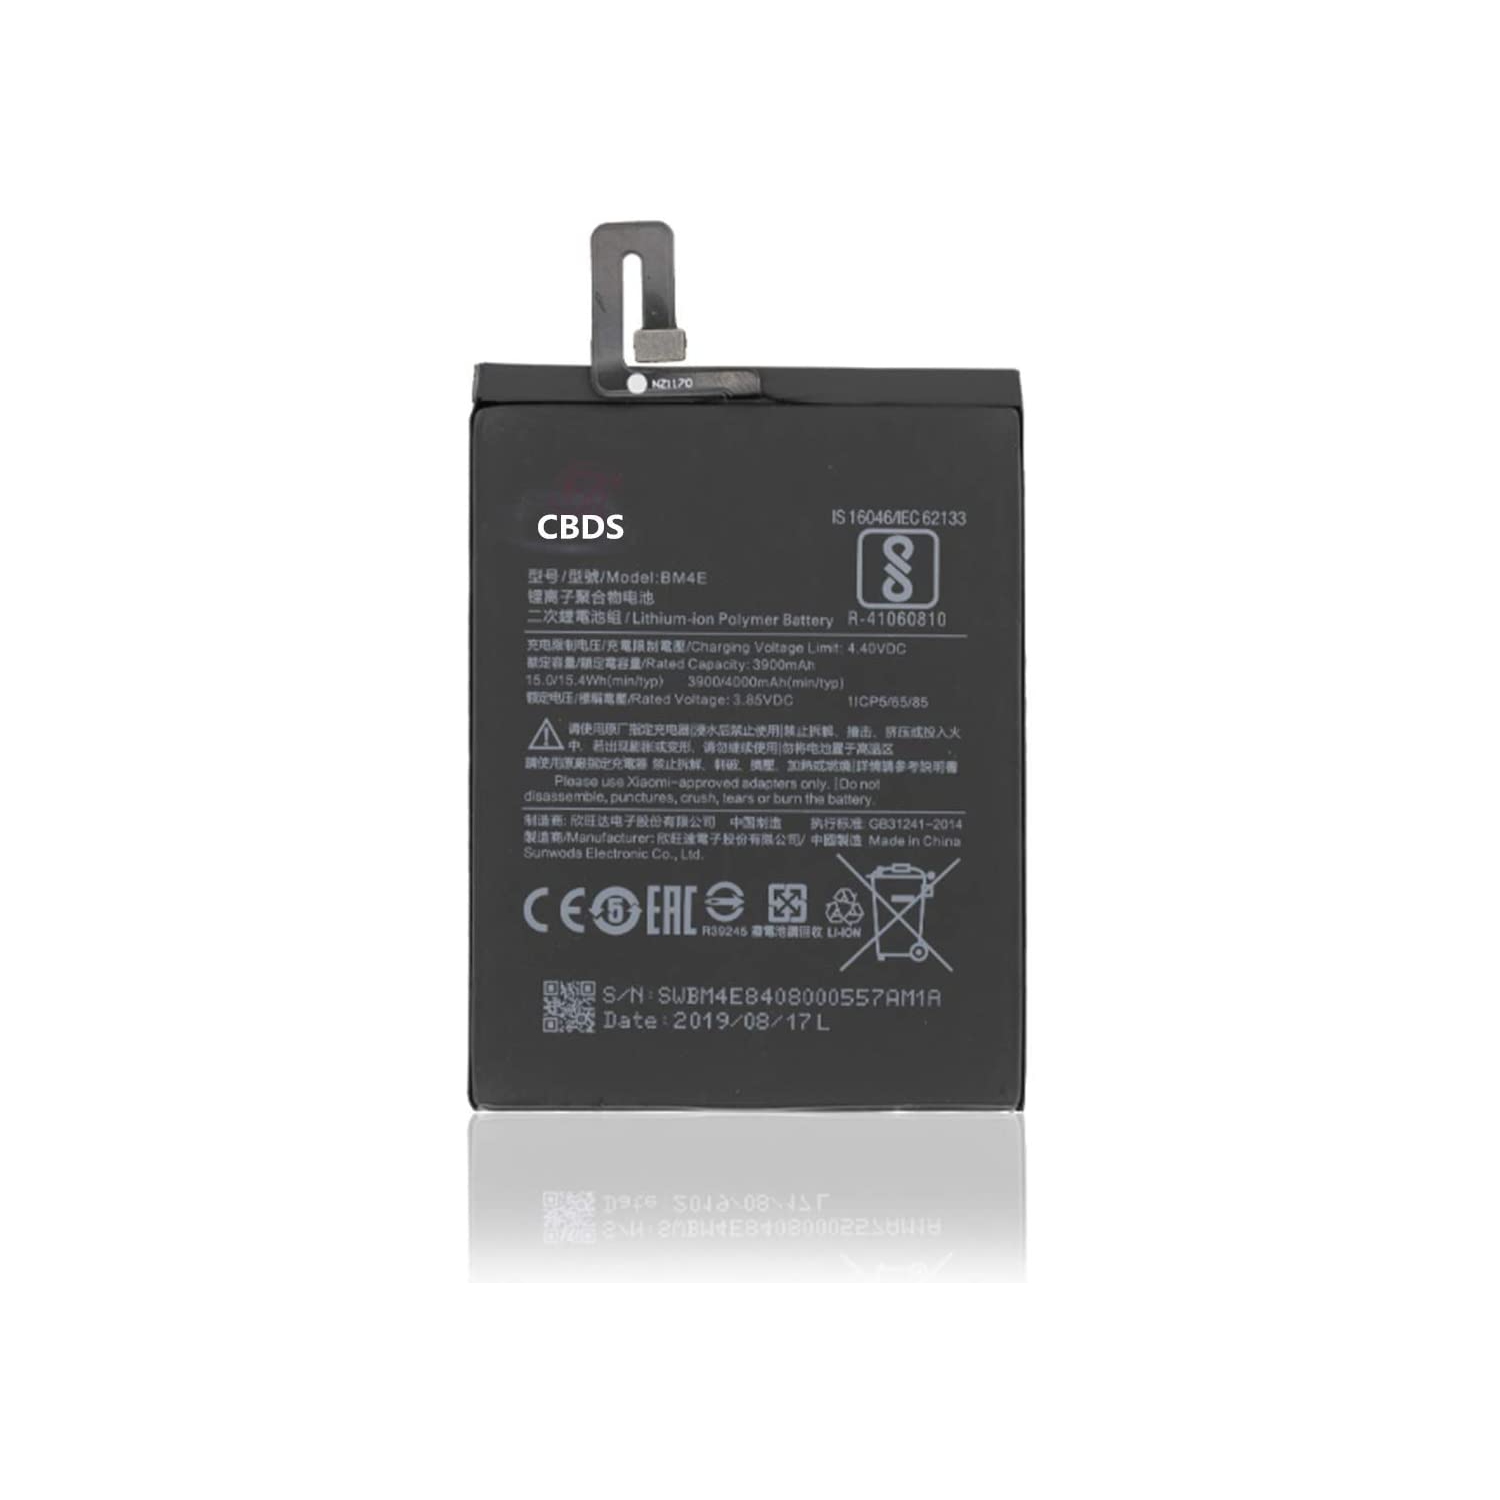 (CBDS) 3900mAh, 15.0 Wh Replacement Battery - Compatible with XIAOMI POCOPHONE F1 BM4E in Non-Retail Packaging.